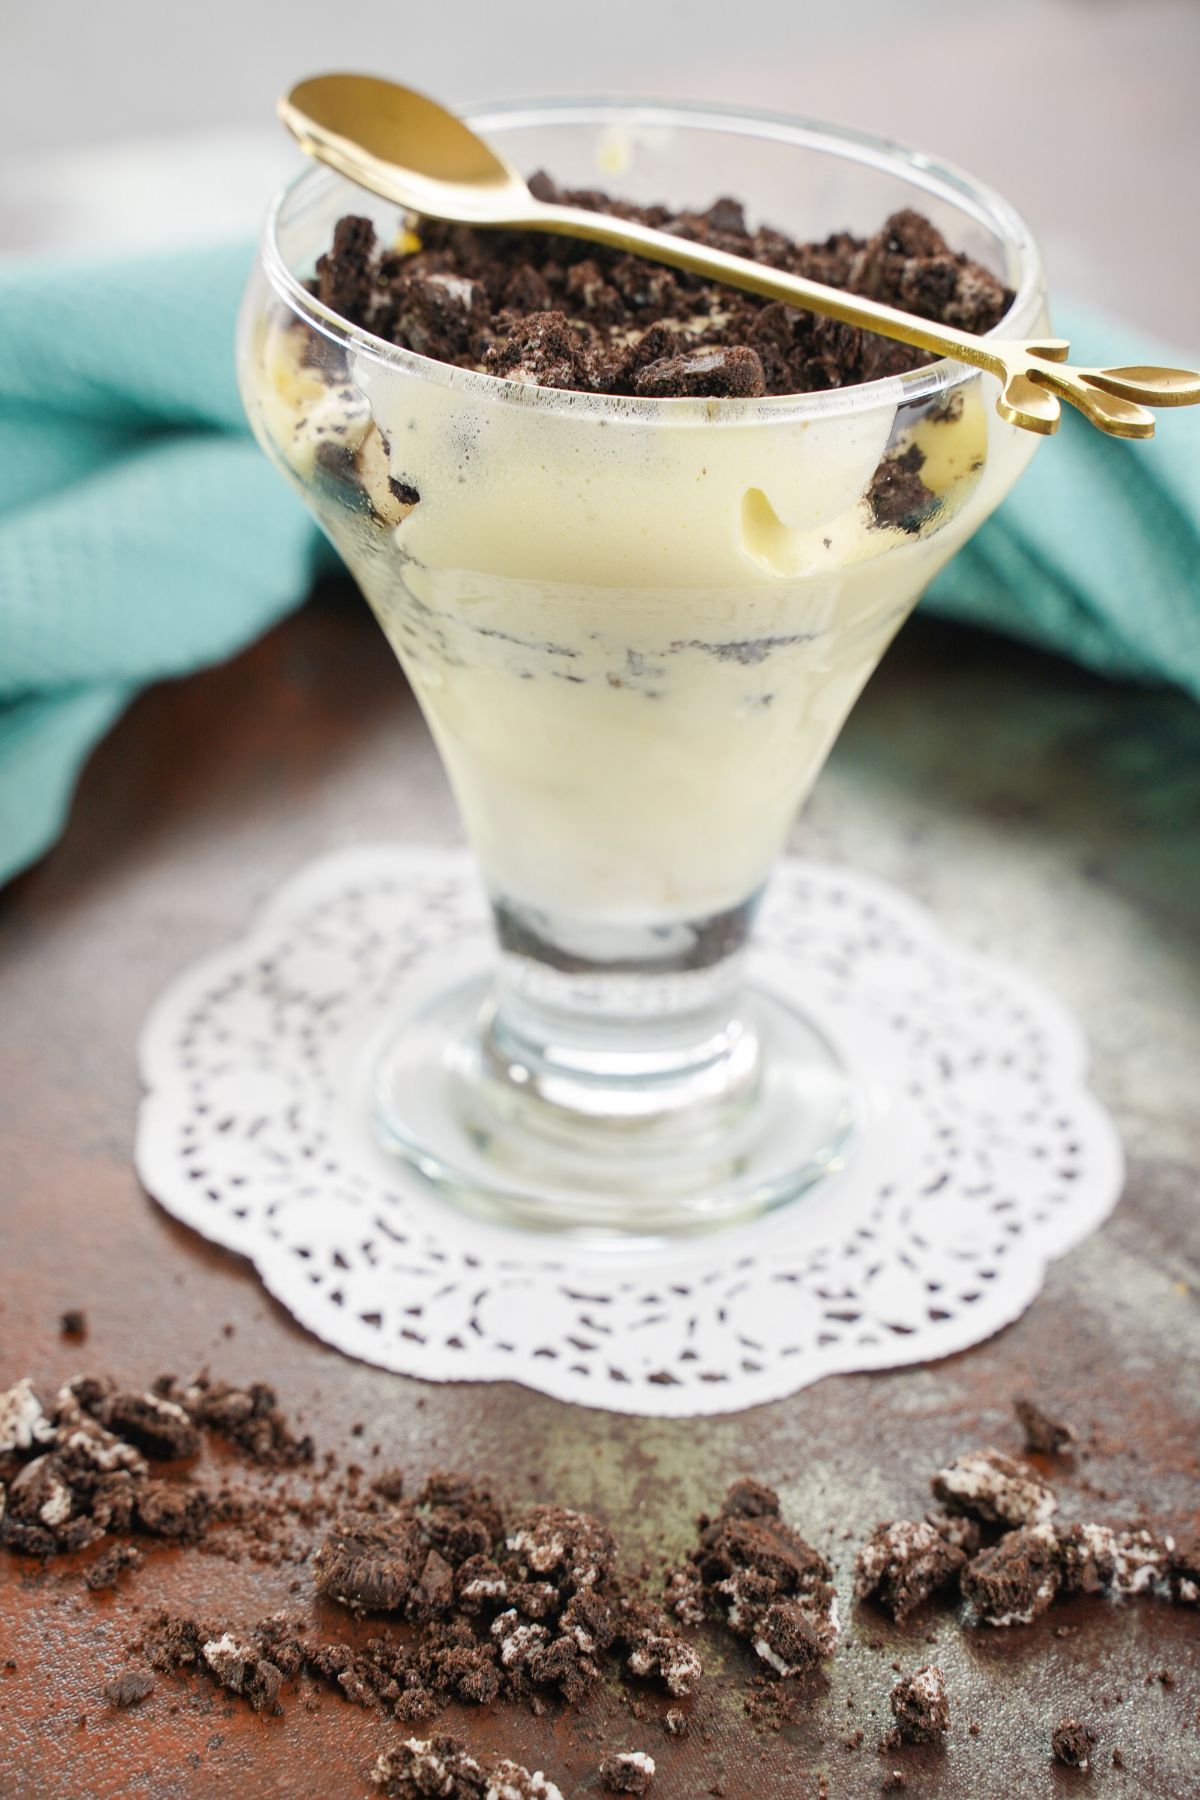 glass dessert cup of pudding and oreos on white doily on table by blue napkin